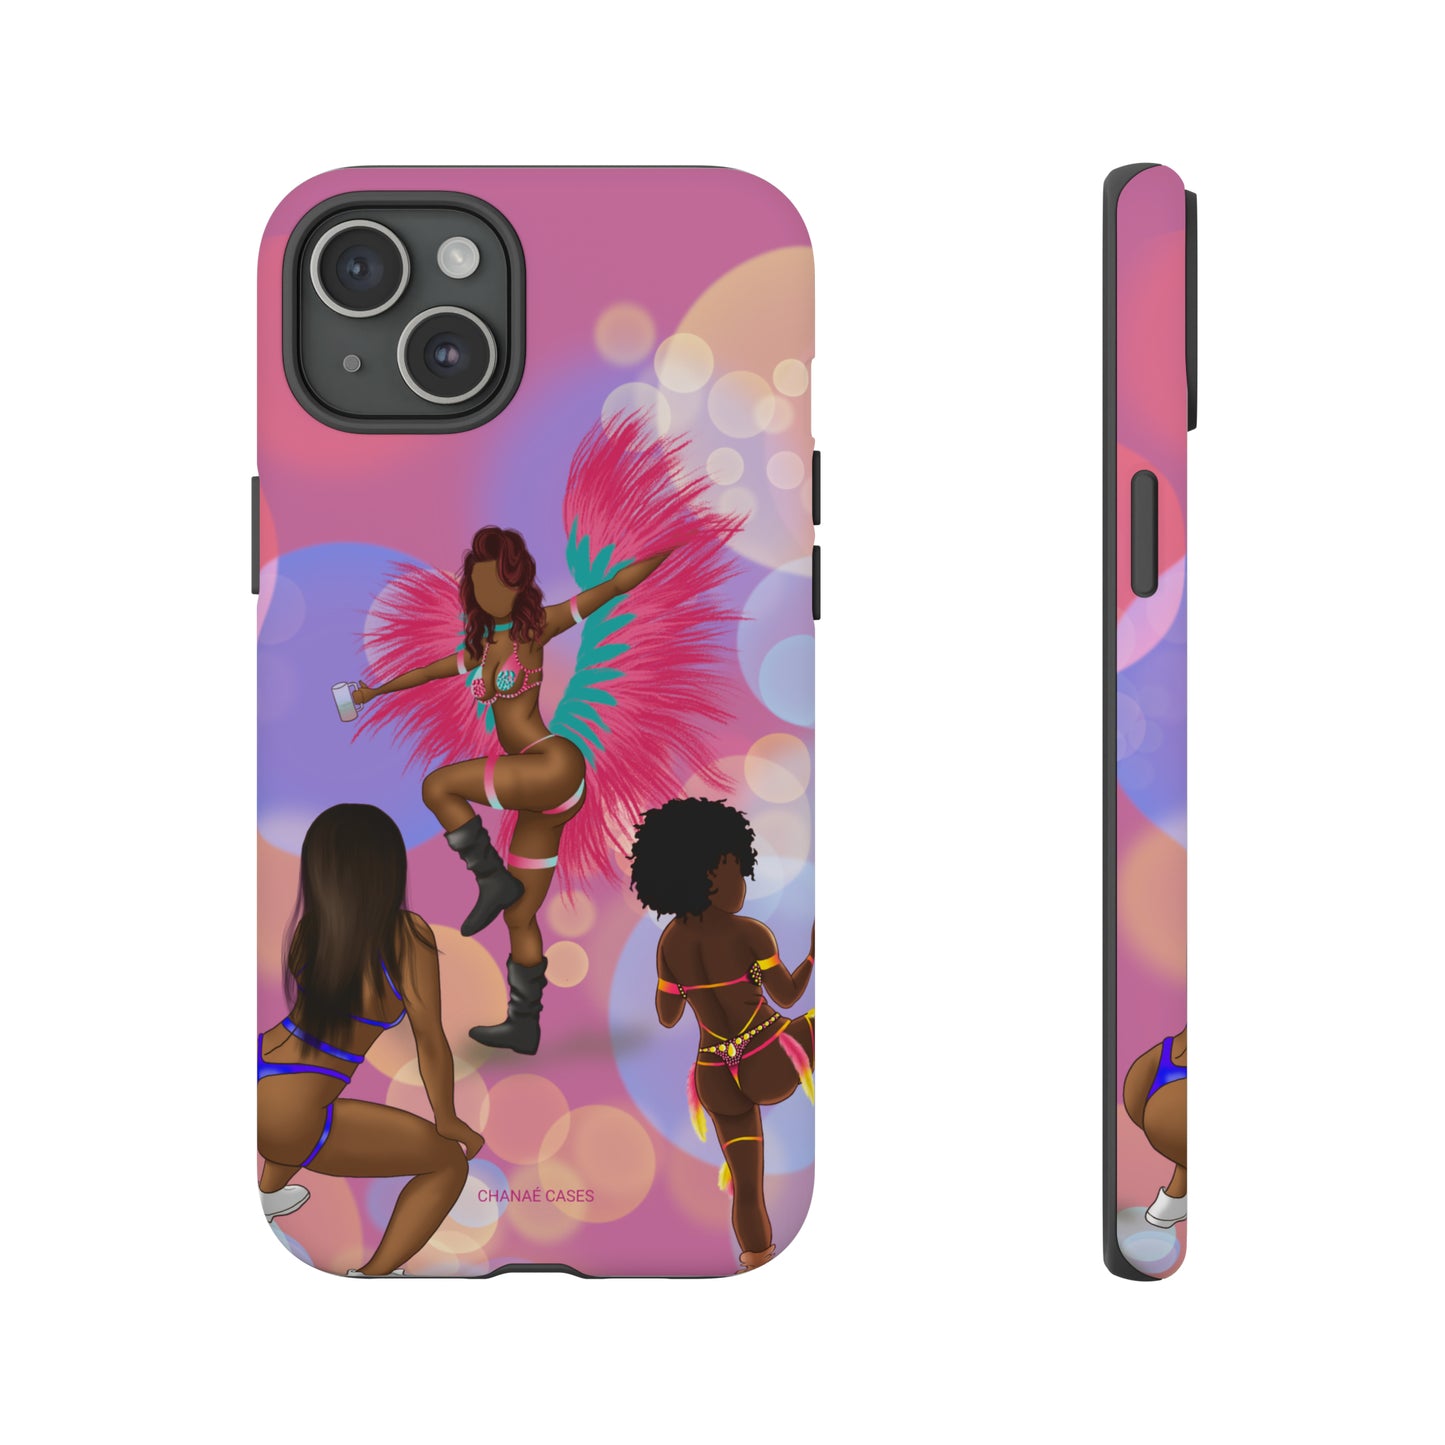 Carnival Queens Only iPhone "Tough" Case (Pink)